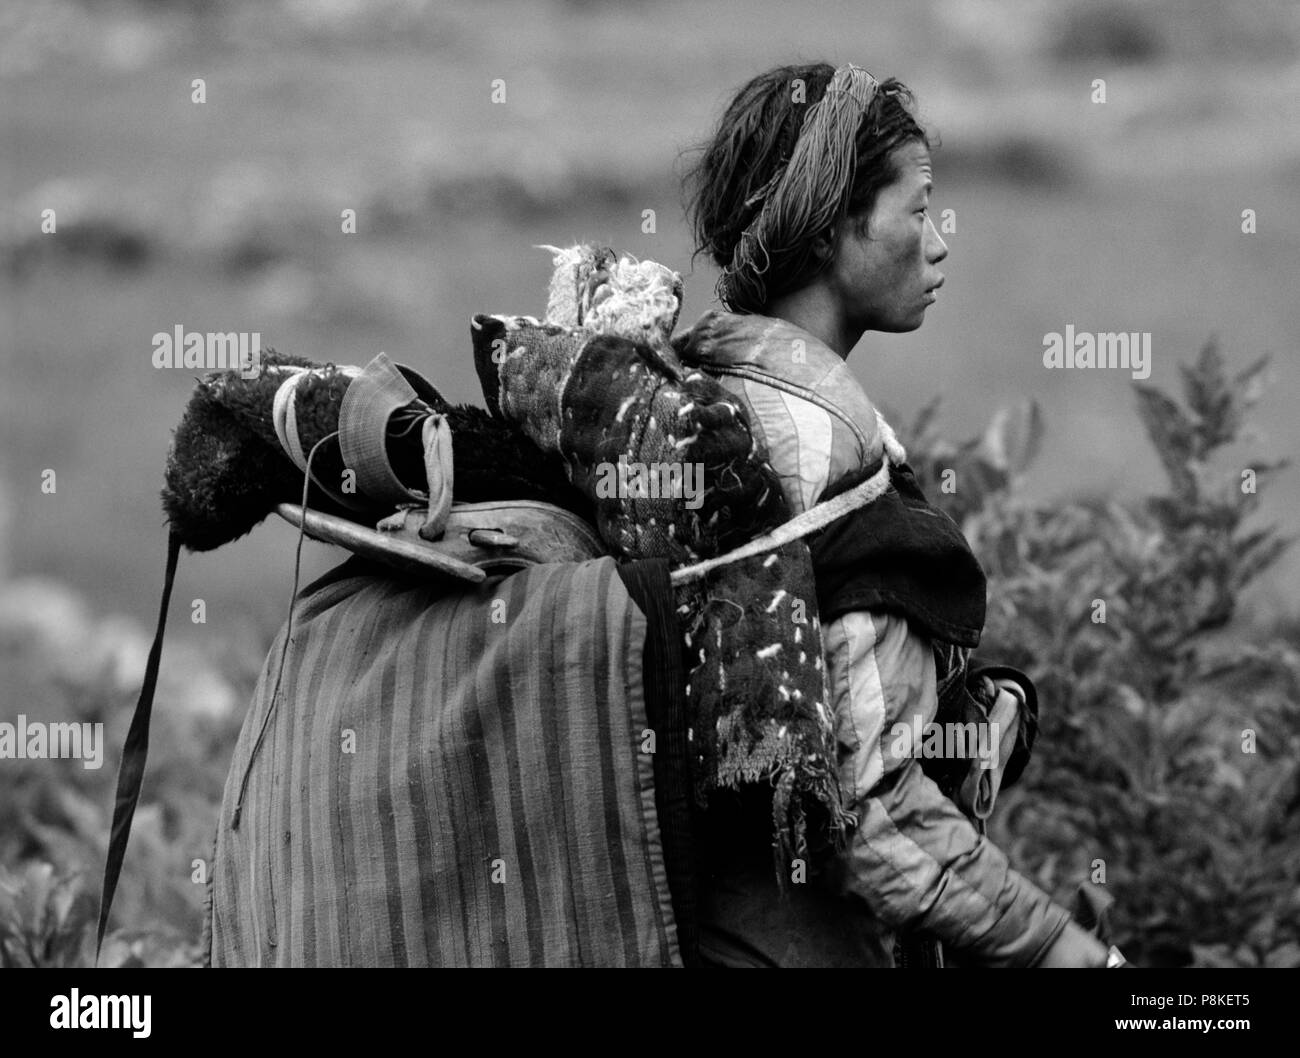 A TIBETAN KAMPA (nomad) carries a horse SADDLE on his back in the DO TARAP VALLEY - DOLPO, NEPAL Stock Photo